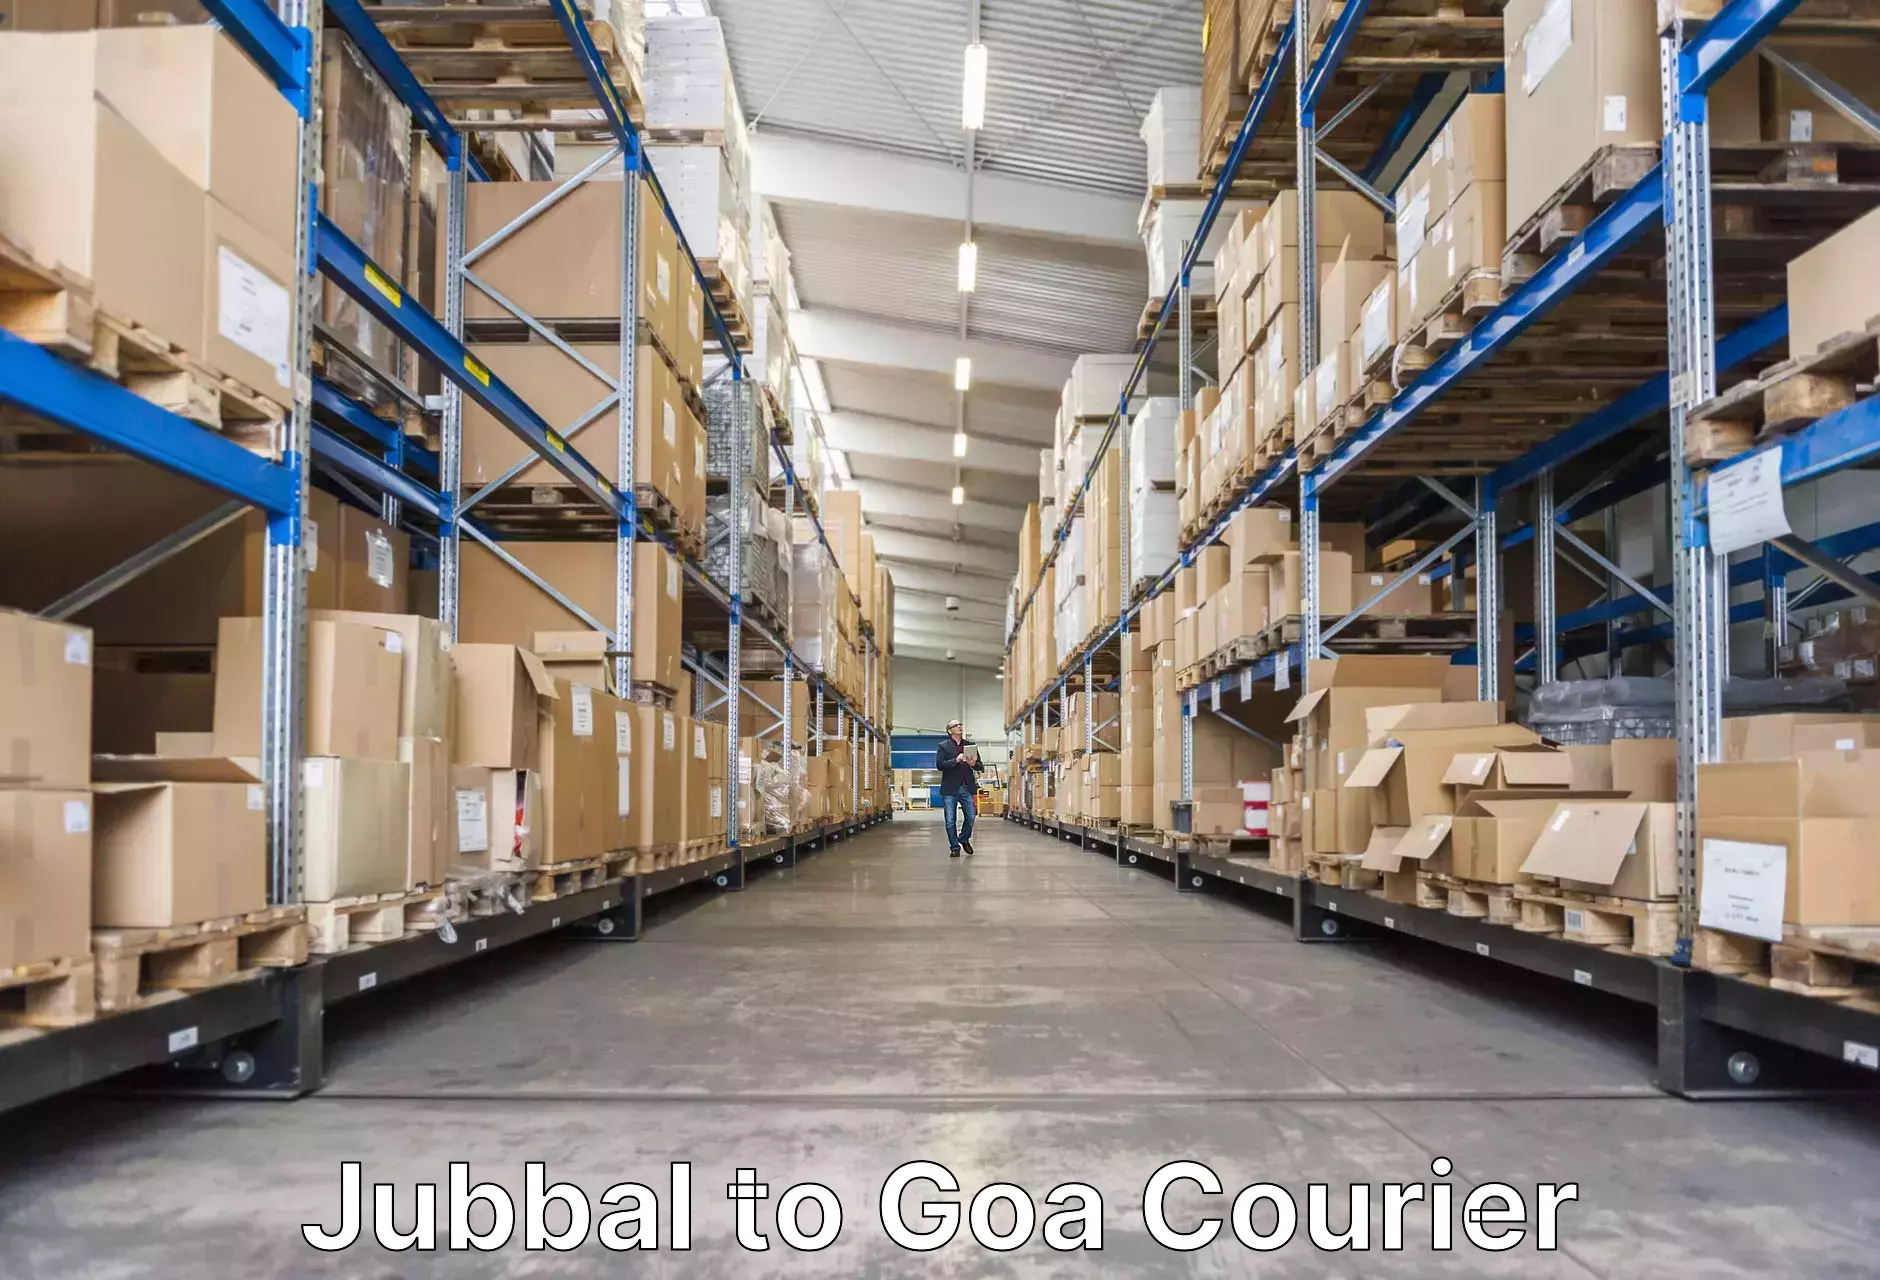 Luggage transport consultancy Jubbal to Goa